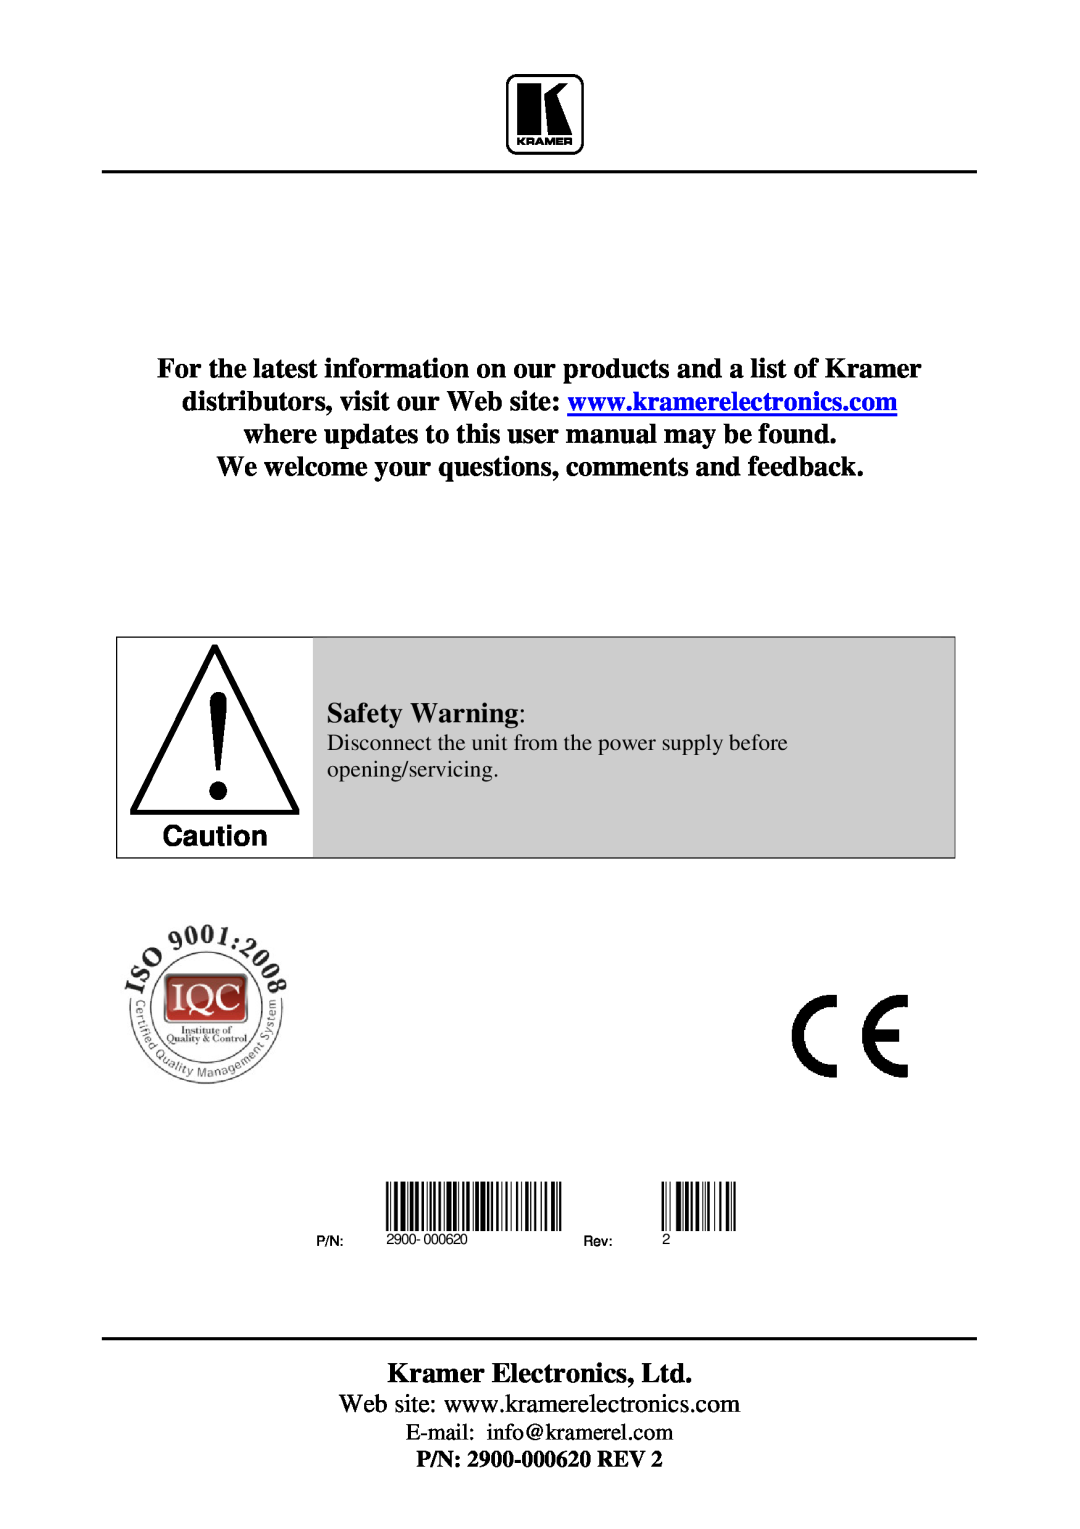 Kramer Electronics PT-101Hxl We welcome your questions, comments and feedback Safety Warning, E-mail info@kramerel.com 